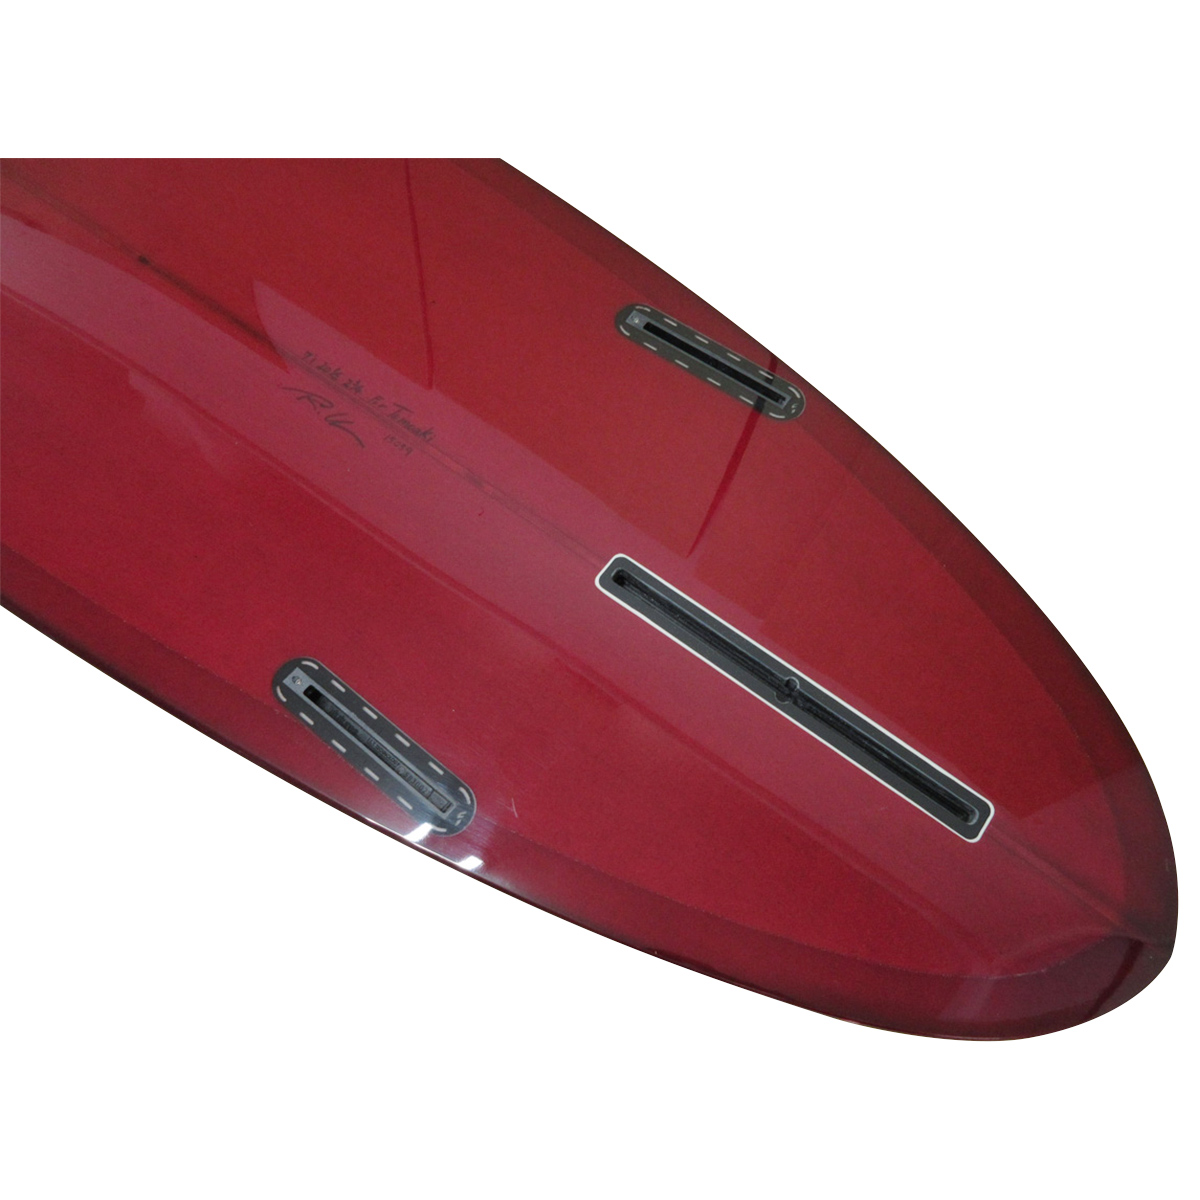 YU SURF CLASSIC / DOUBLE ENDER 7`1 Shaped By RU